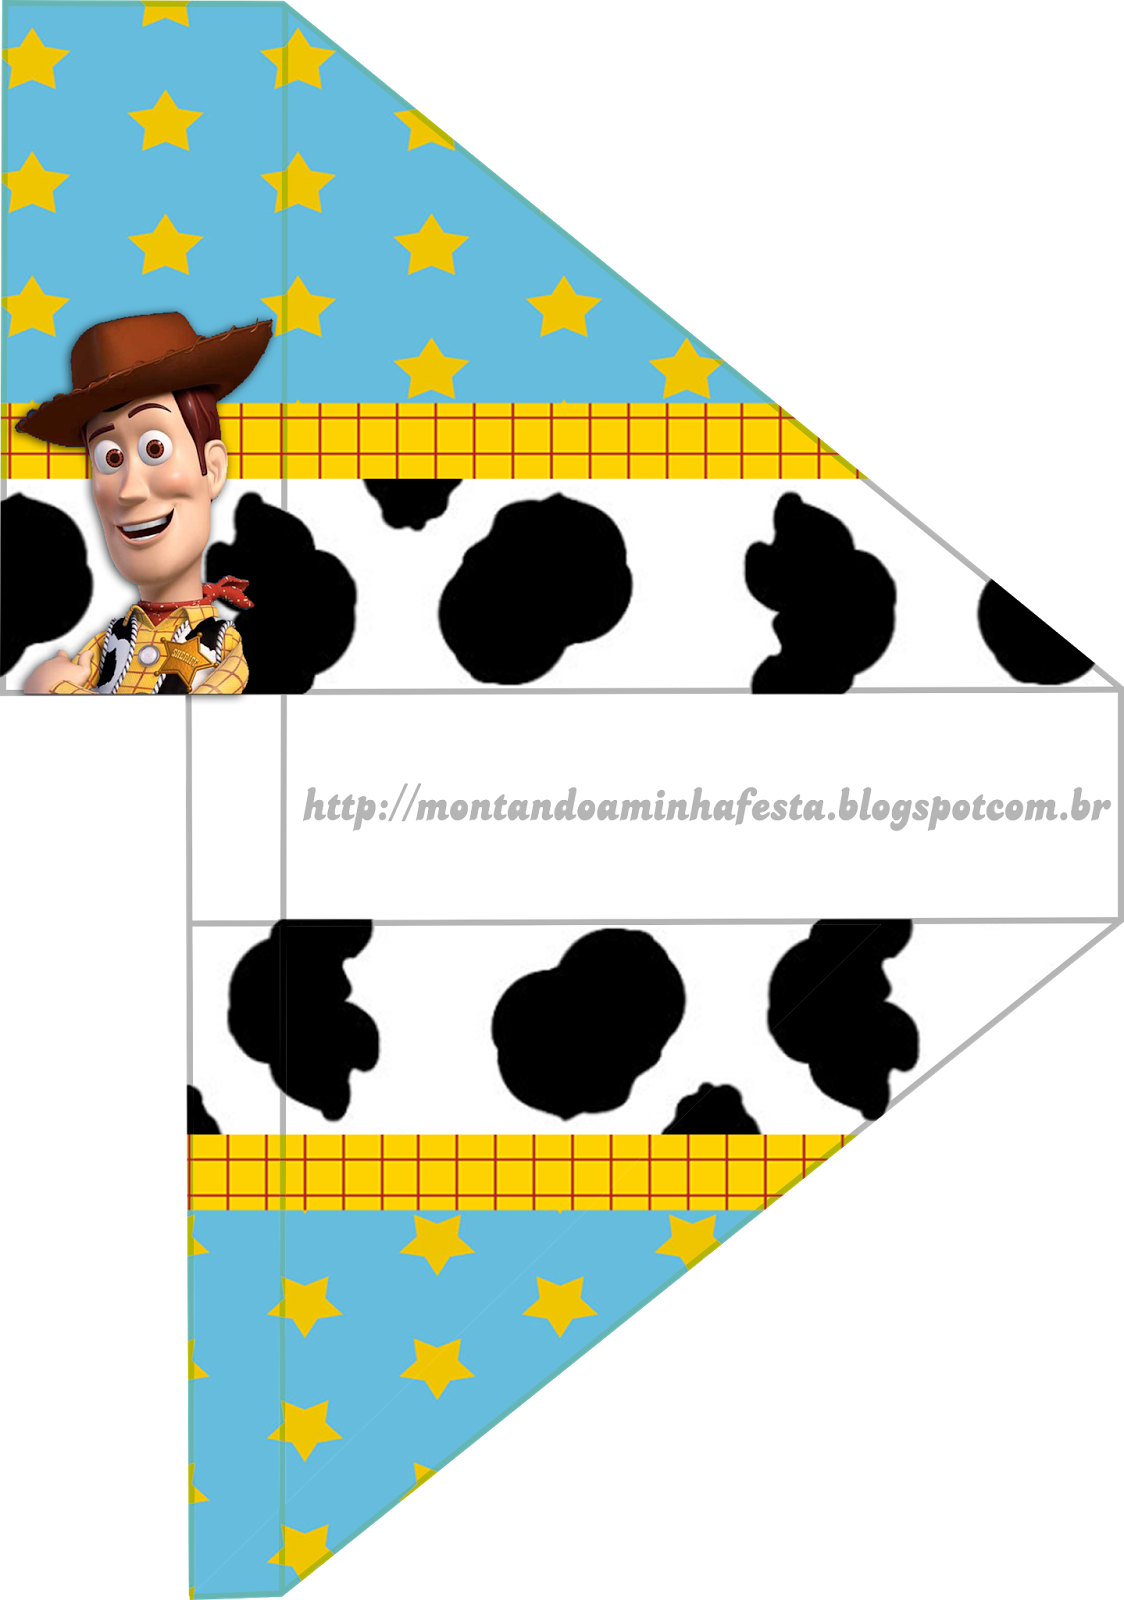 toy-story-party-free-party-printables-oh-my-fiesta-in-english